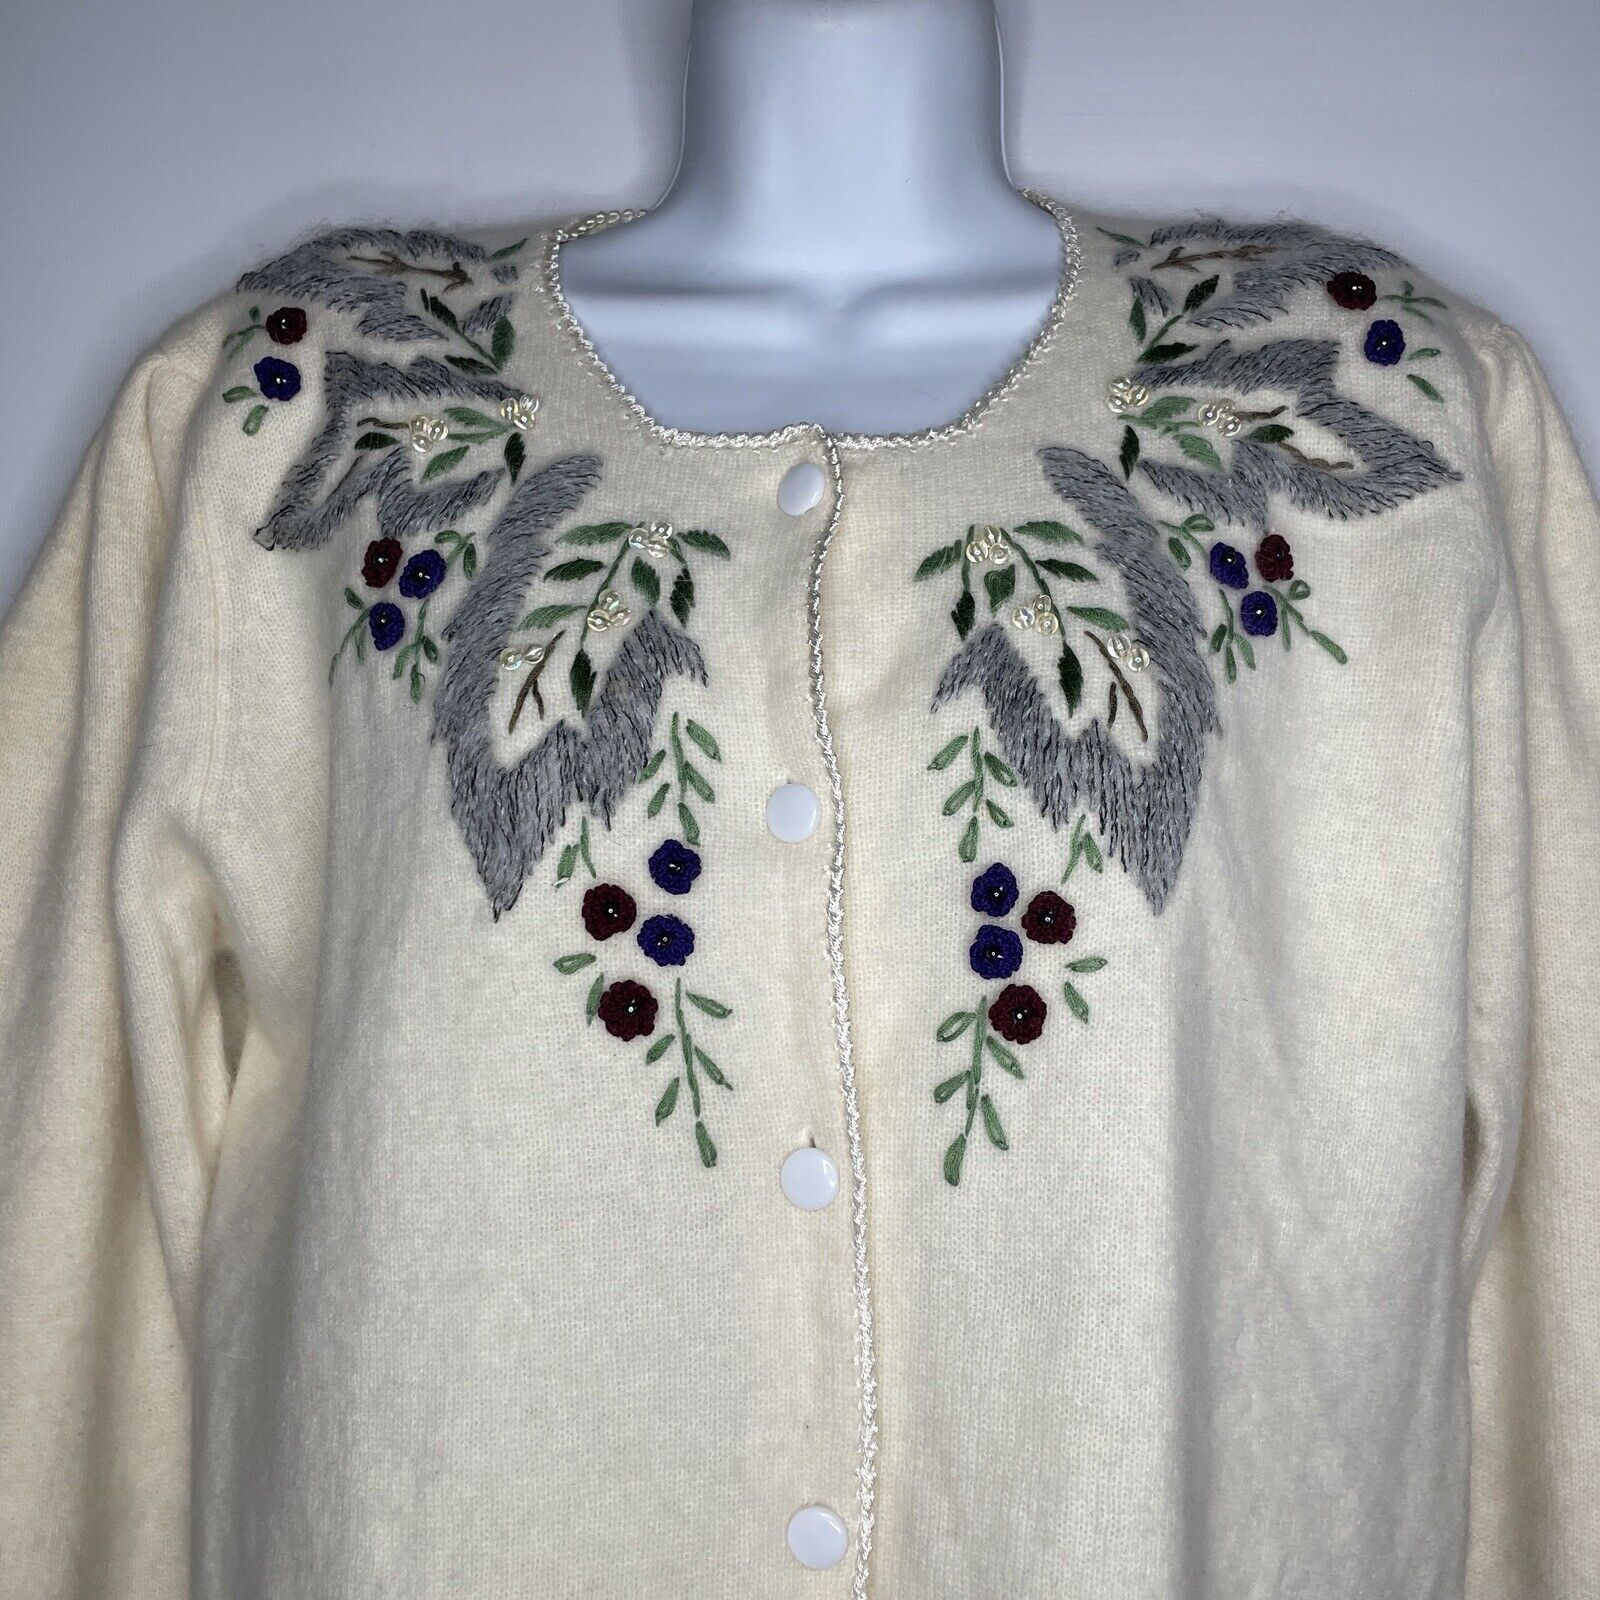 Vintage 80s Ivory Floral Embroidered Beaded Fuzzy Cardigan Sweater Size L / US 10 / IT 46 - 2 Preview